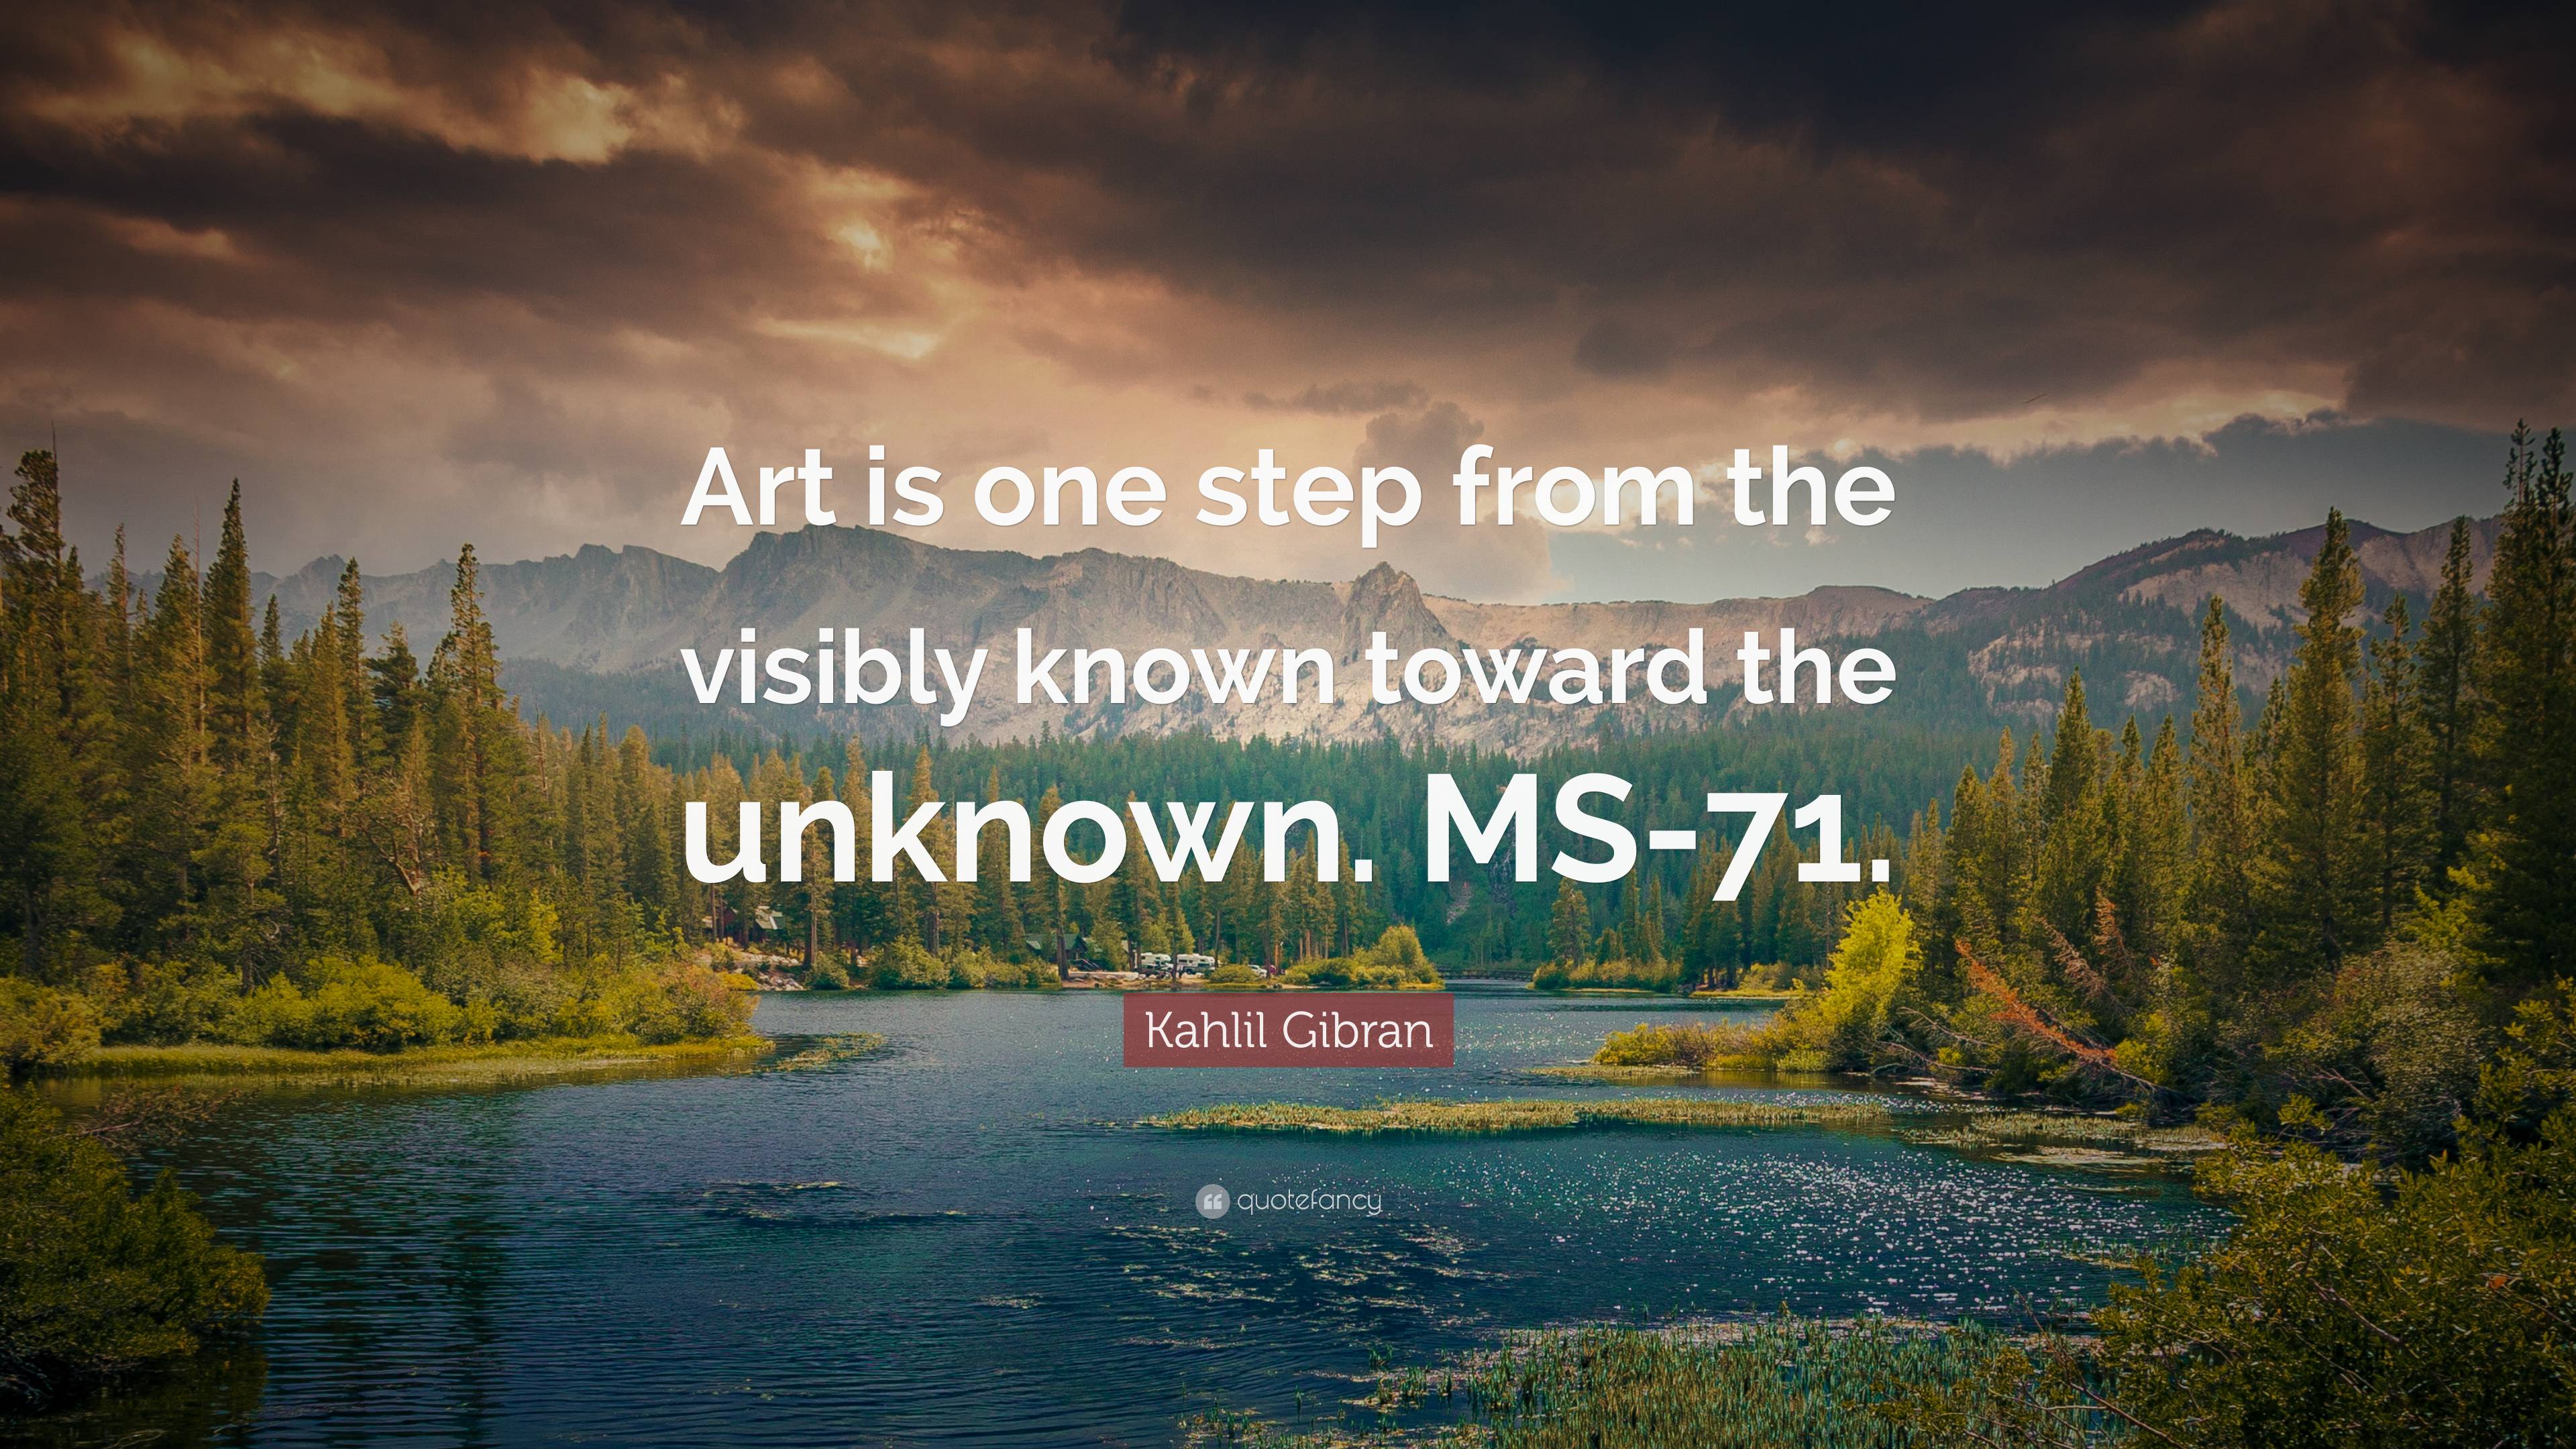 Kahlil Gibran Quote: “Art is one step from the visibly known toward the ...